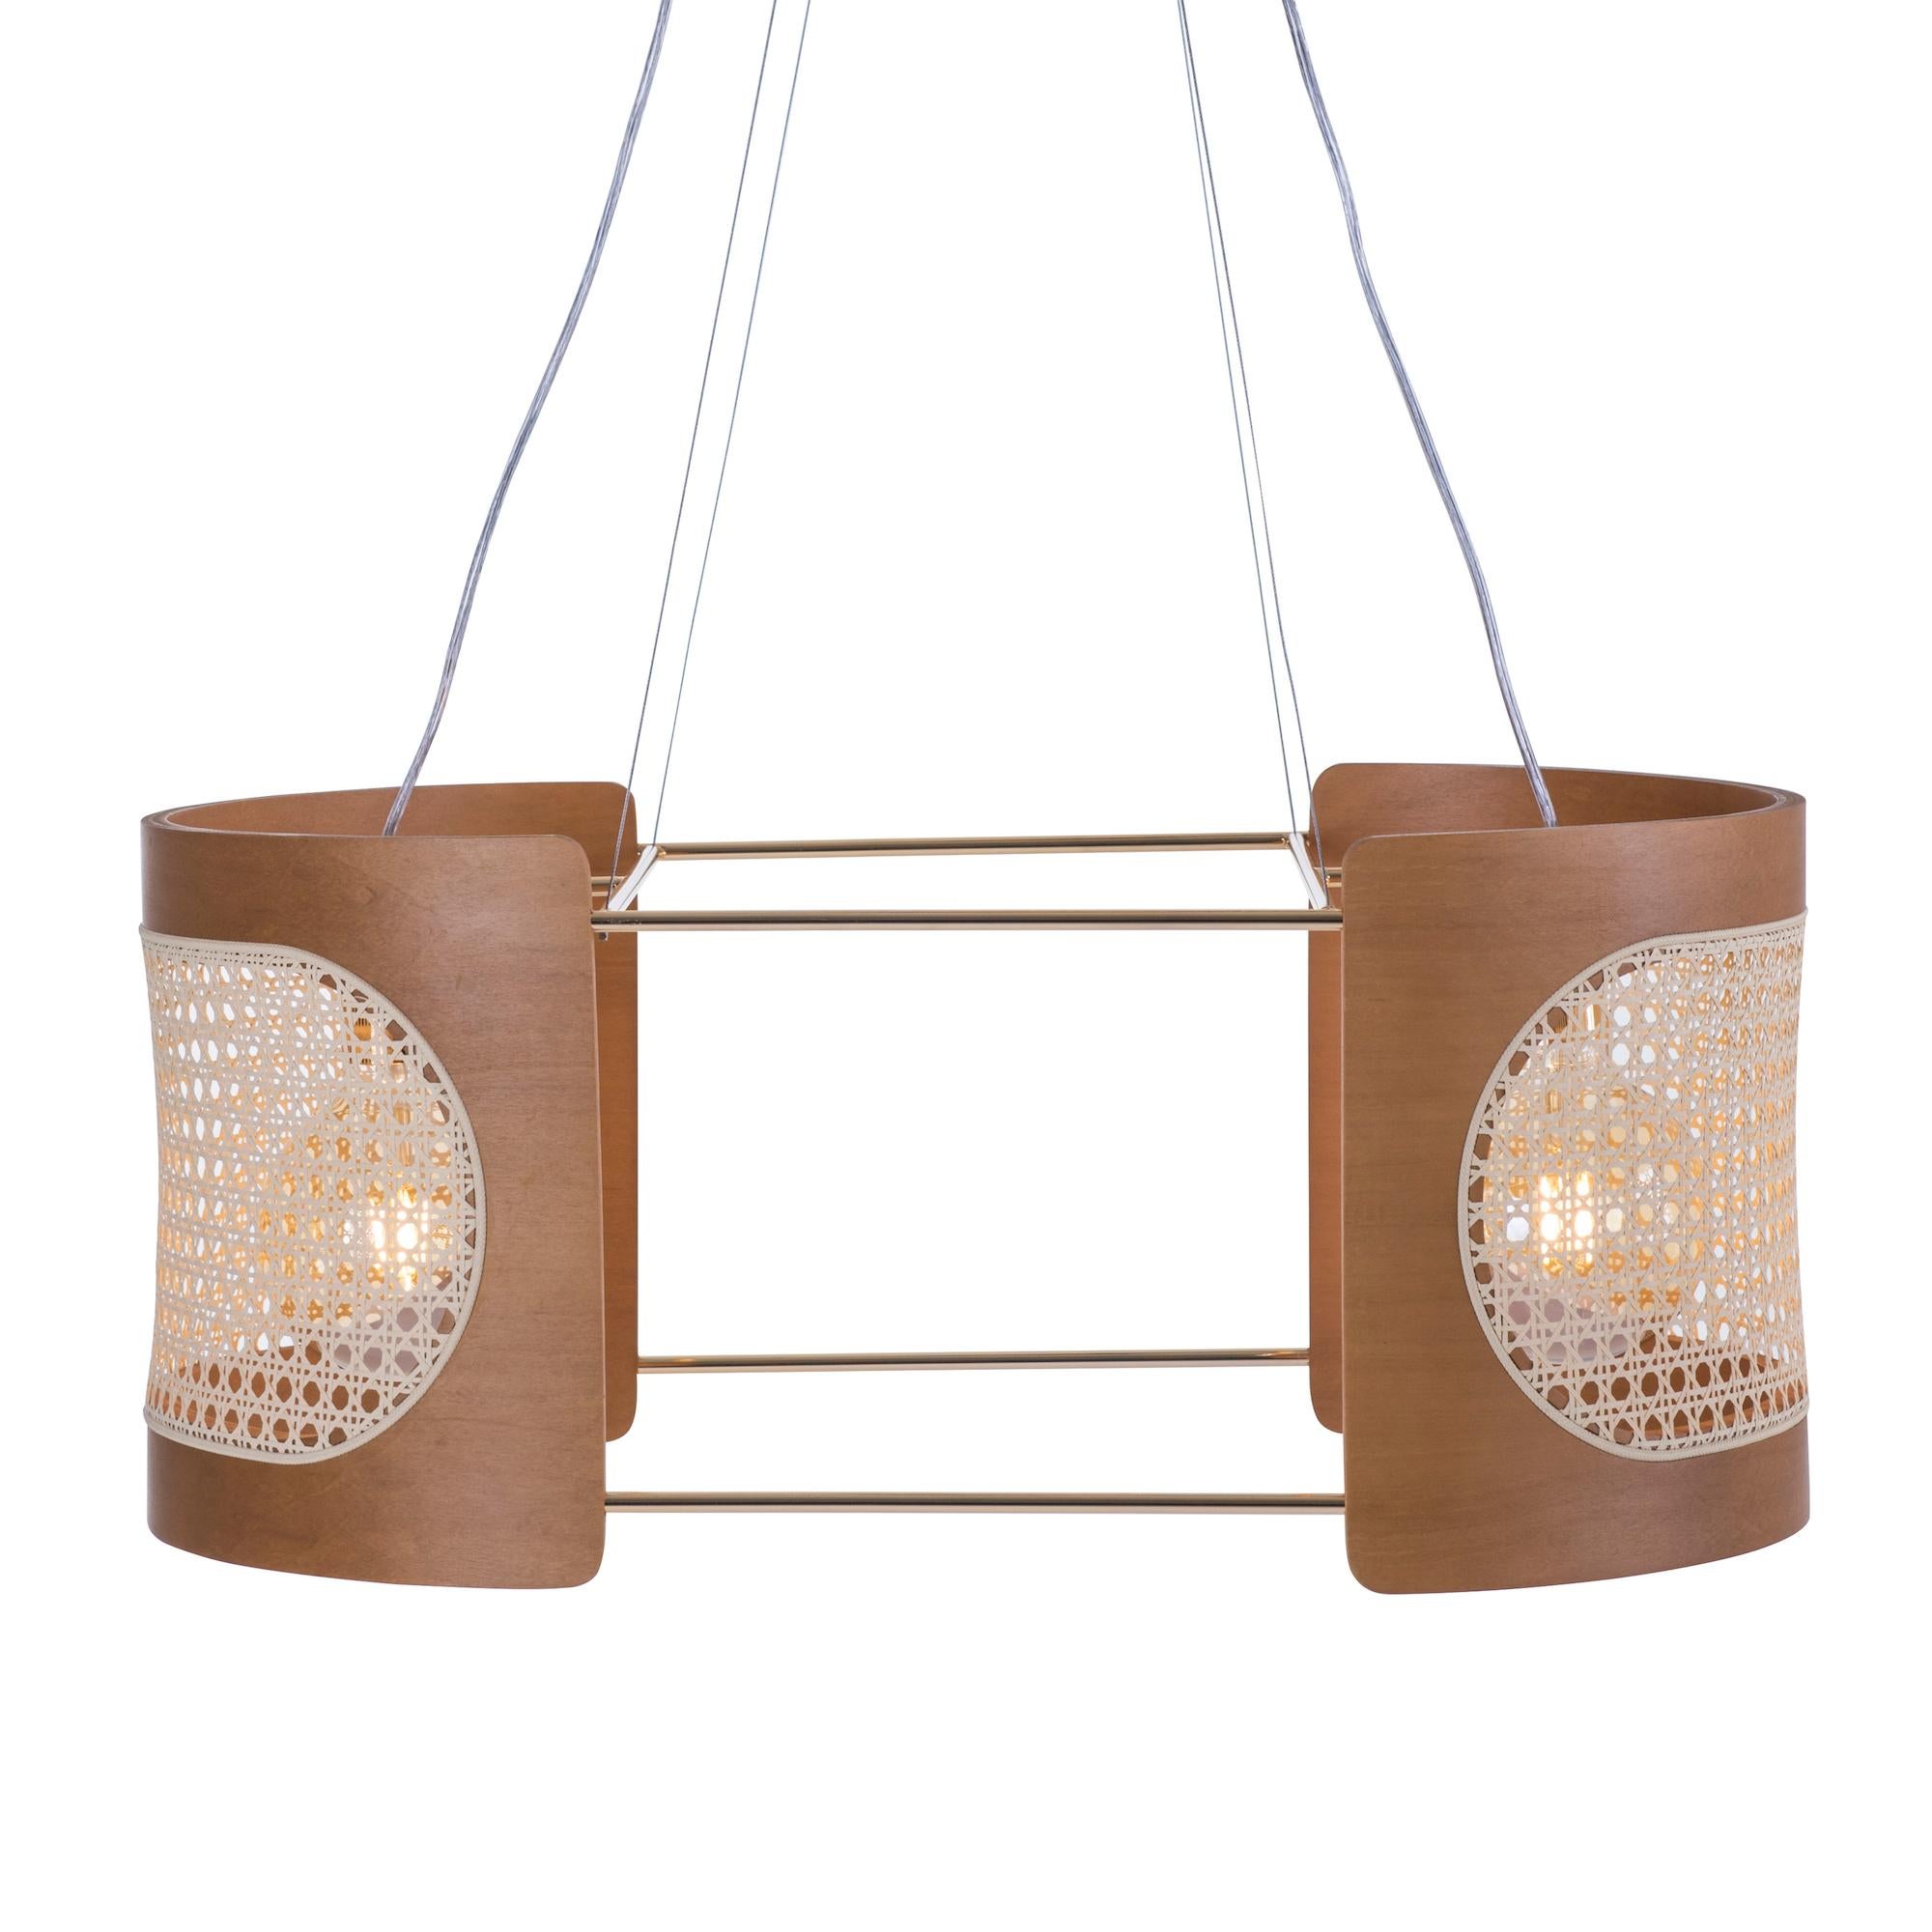 Hand-Crafted Contemporary Pendant Lamp Noce Large Size, Brazilian Wood and Natural Straw For Sale